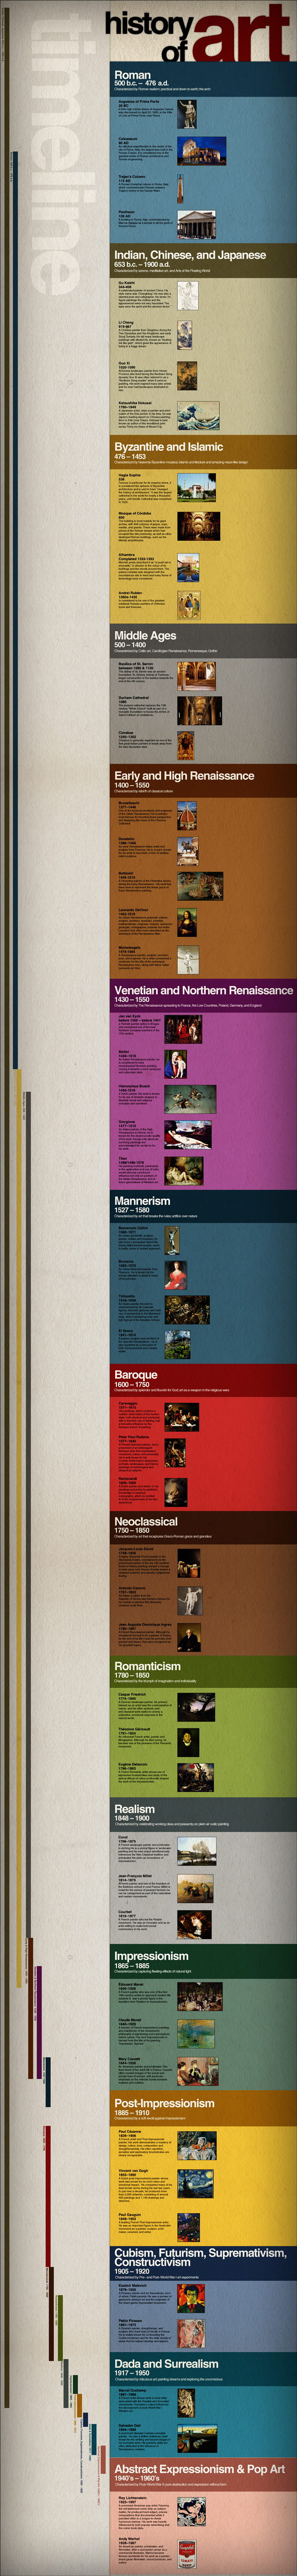 Timeline History Of Art Up Through Our Modern Era